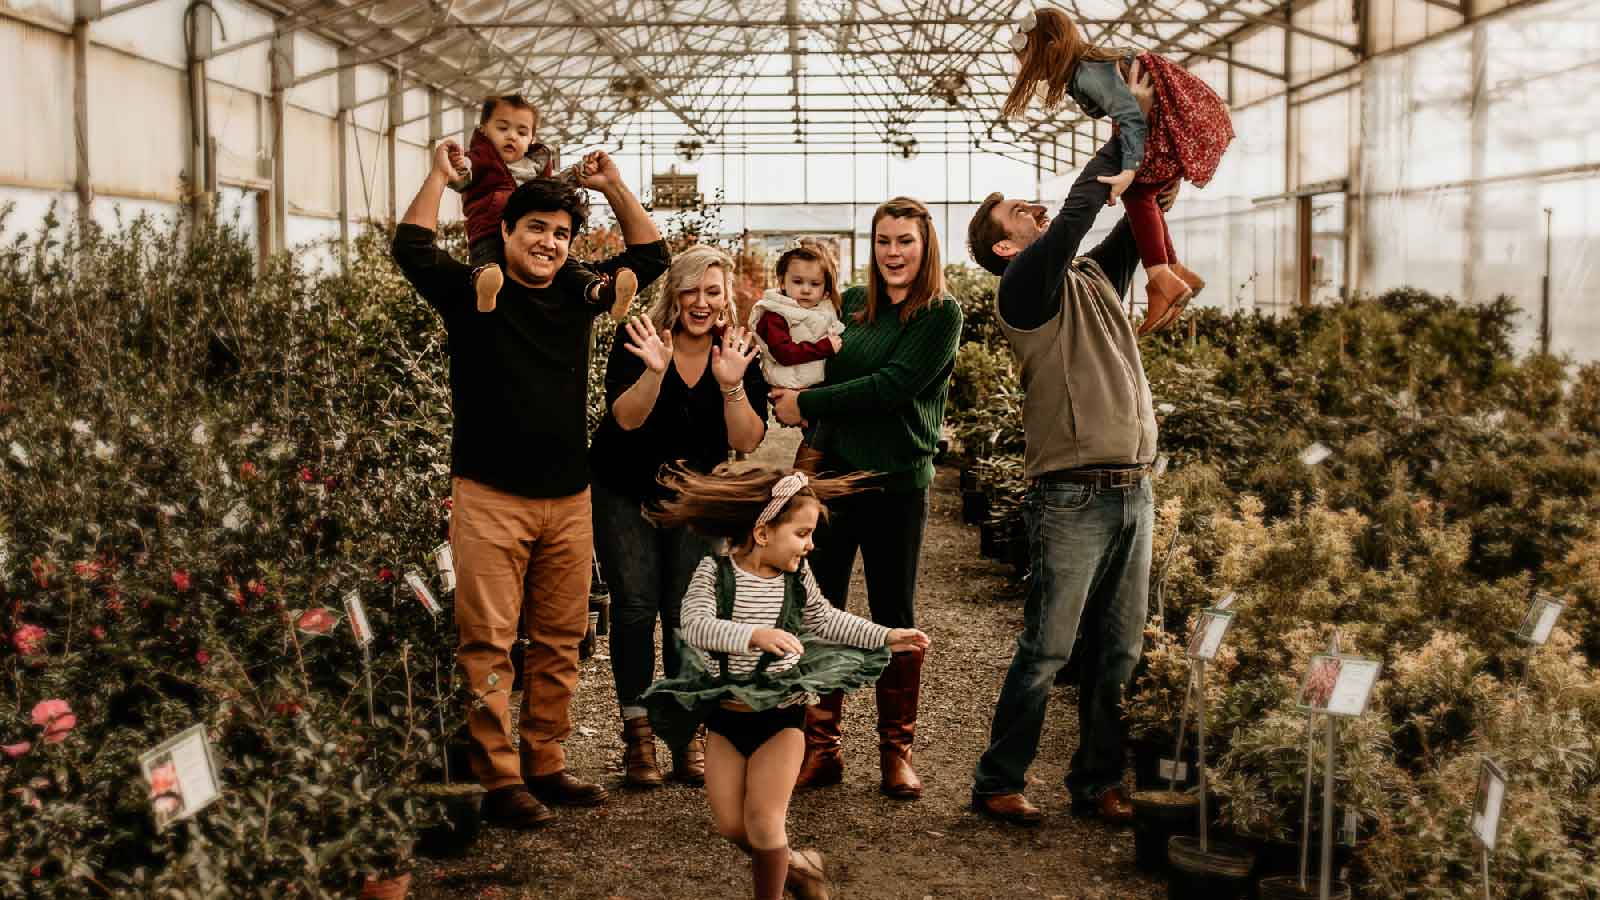 Extended Family In A Greenhouse